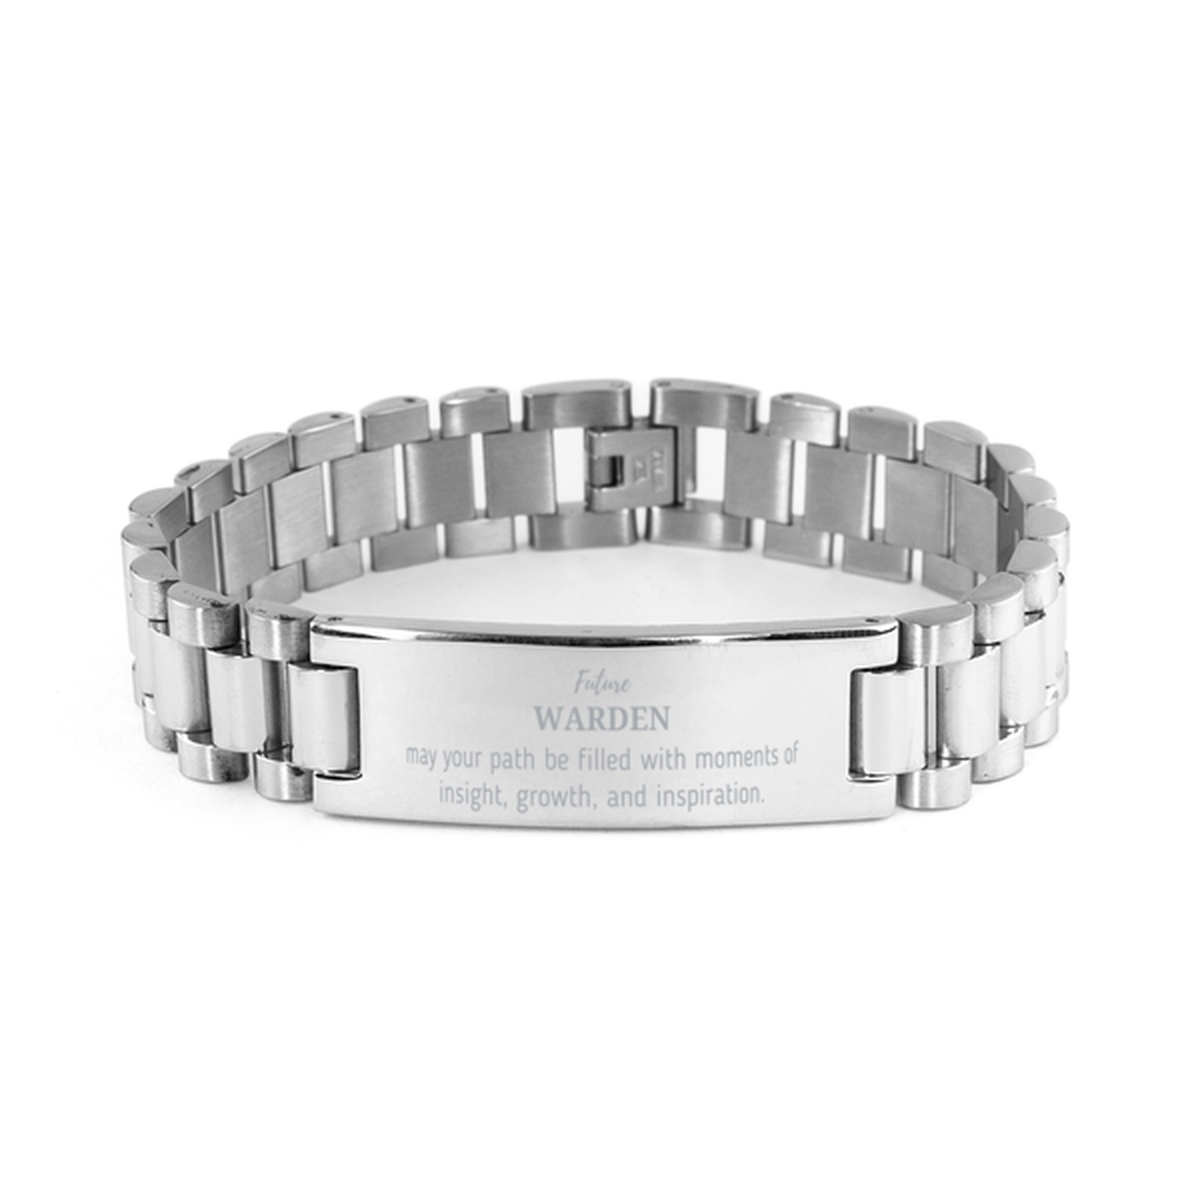 Future Warden Gifts, May your path be filled with moments of insight, Graduation Gifts for New Warden, Christmas Unique Ladder Stainless Steel Bracelet For Men, Women, Friends